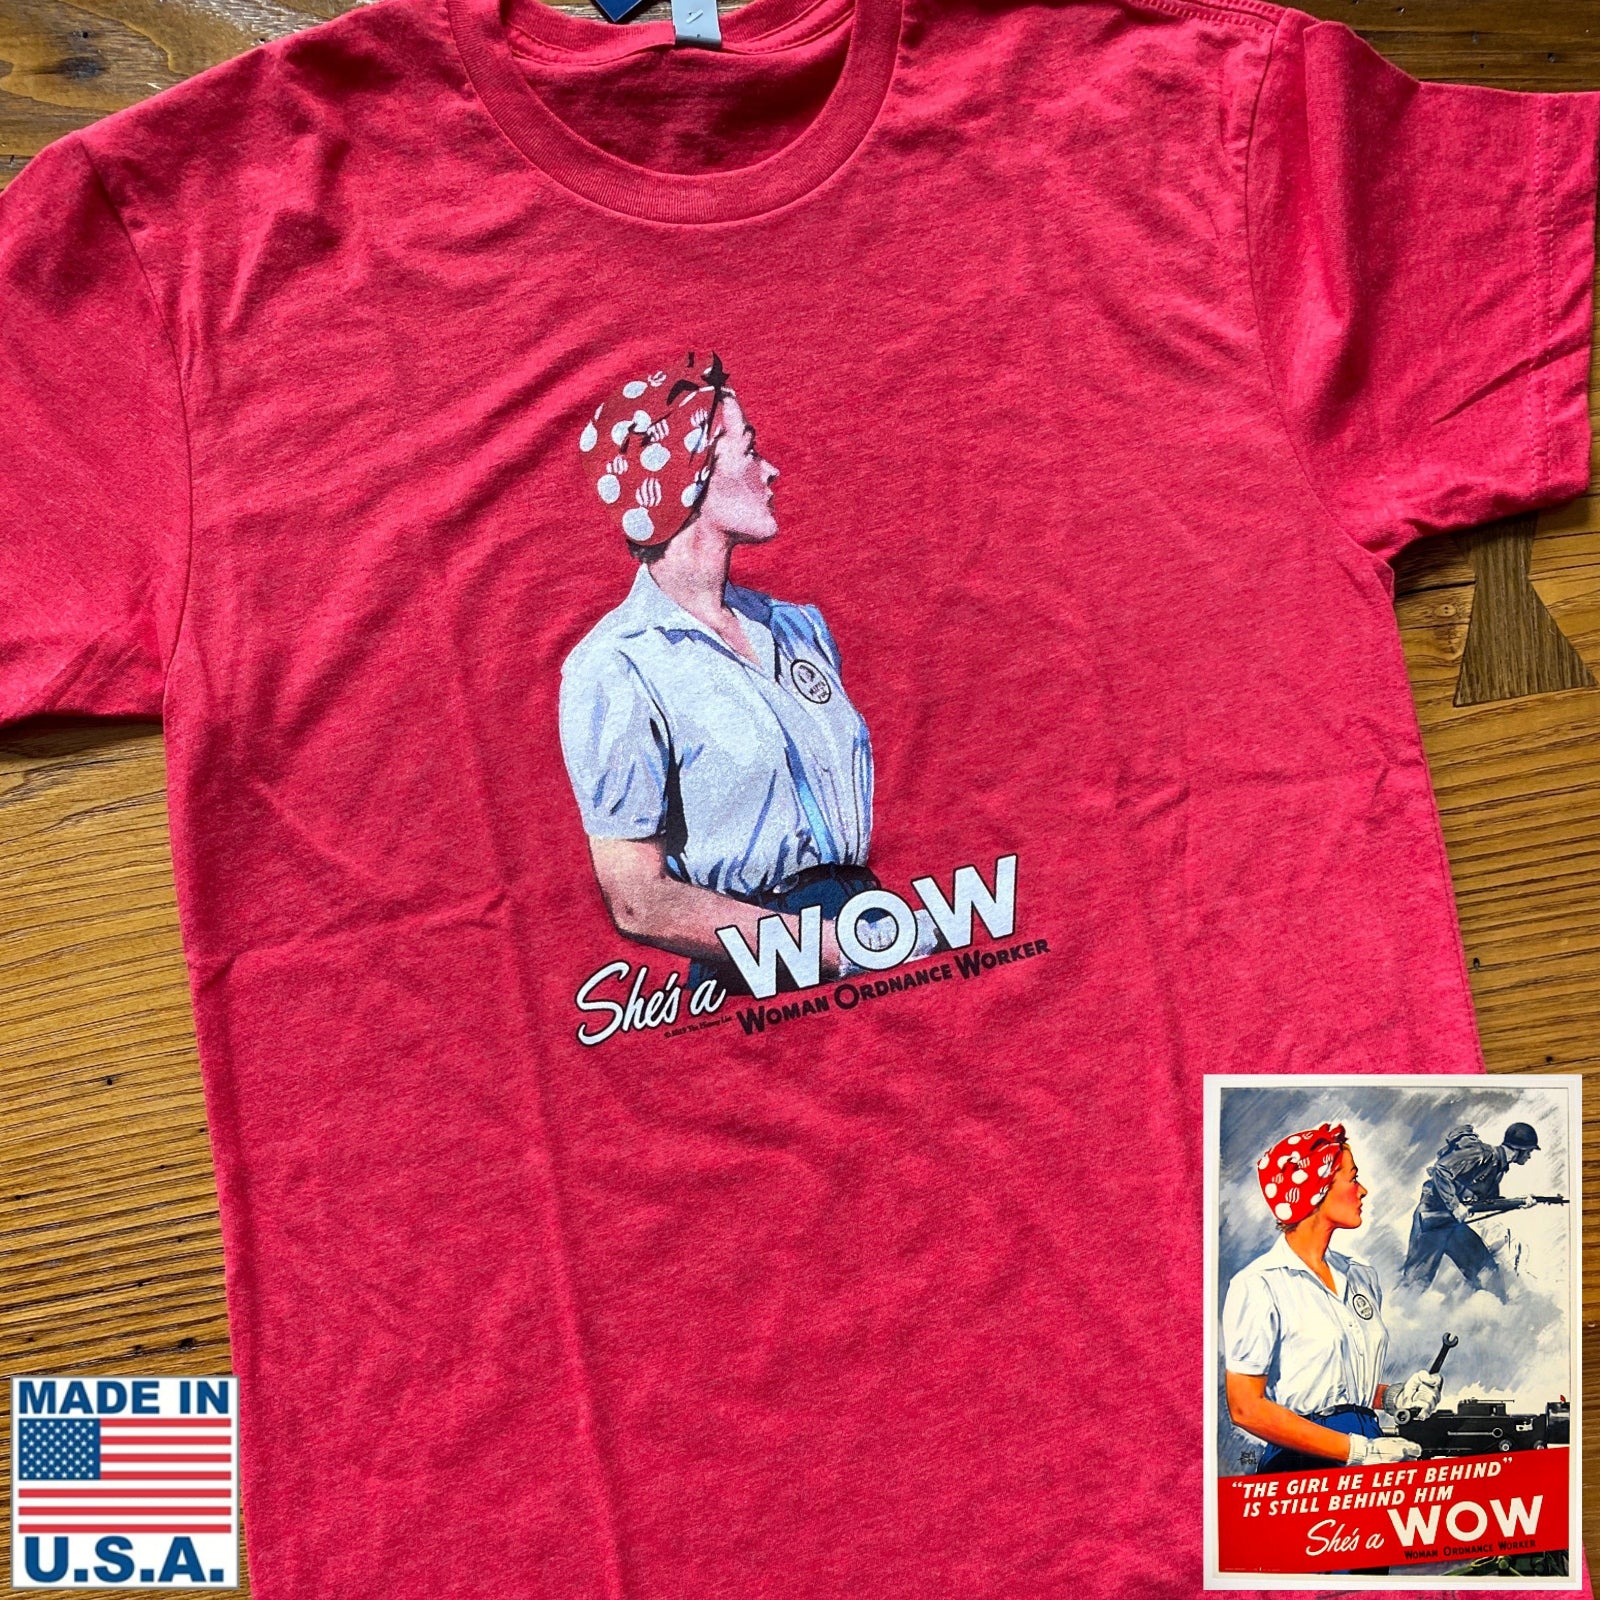 "She's a W.O.W." Shirt from The History List store